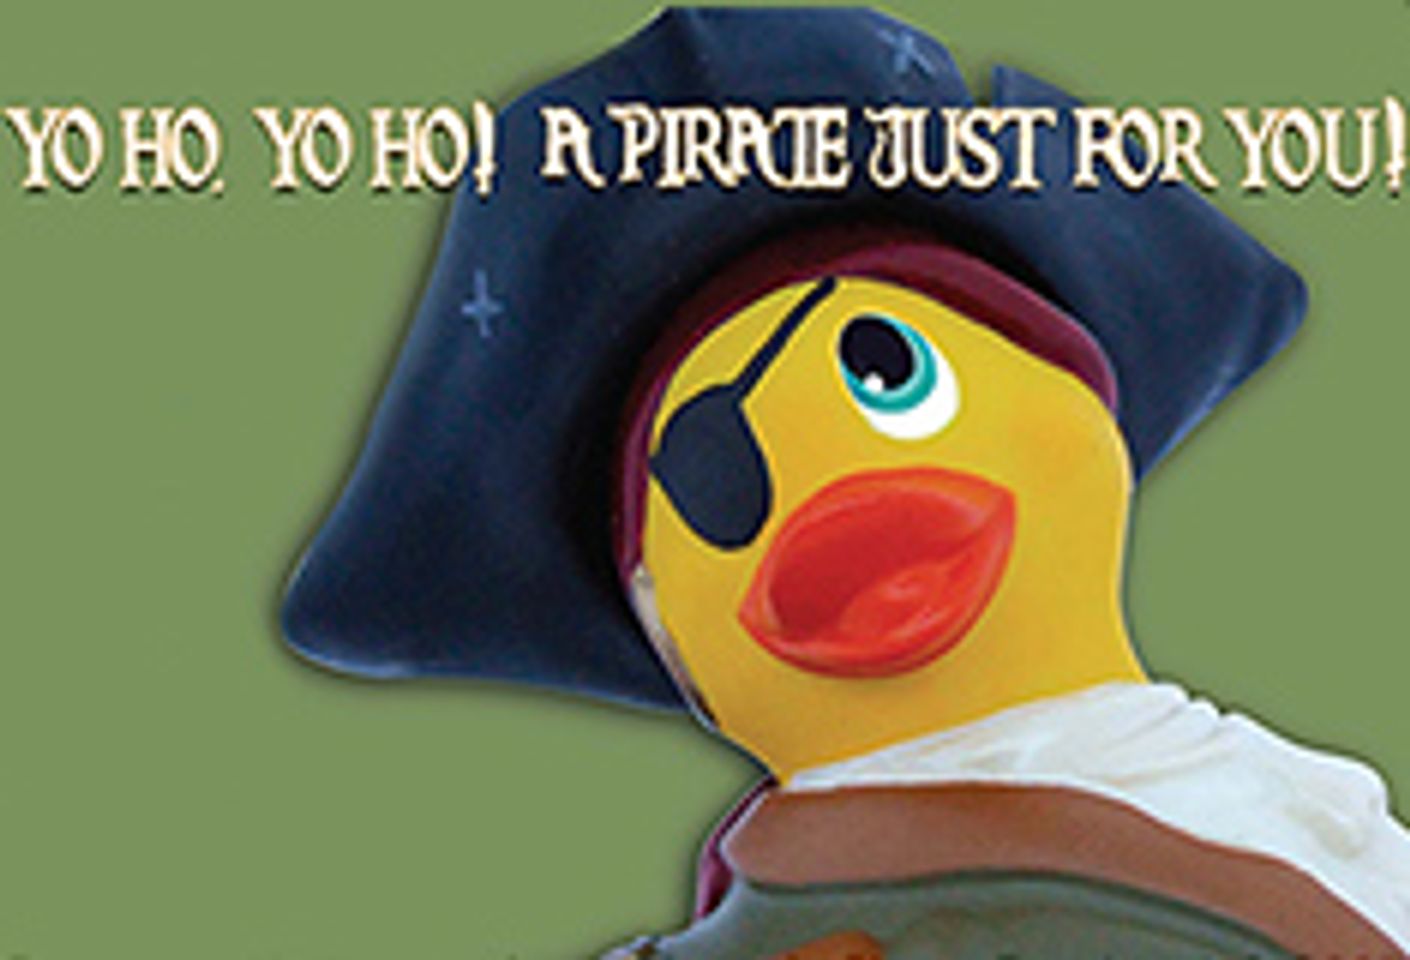 ANB, Big Teaze to Give Away Pirate Duckies at ILS